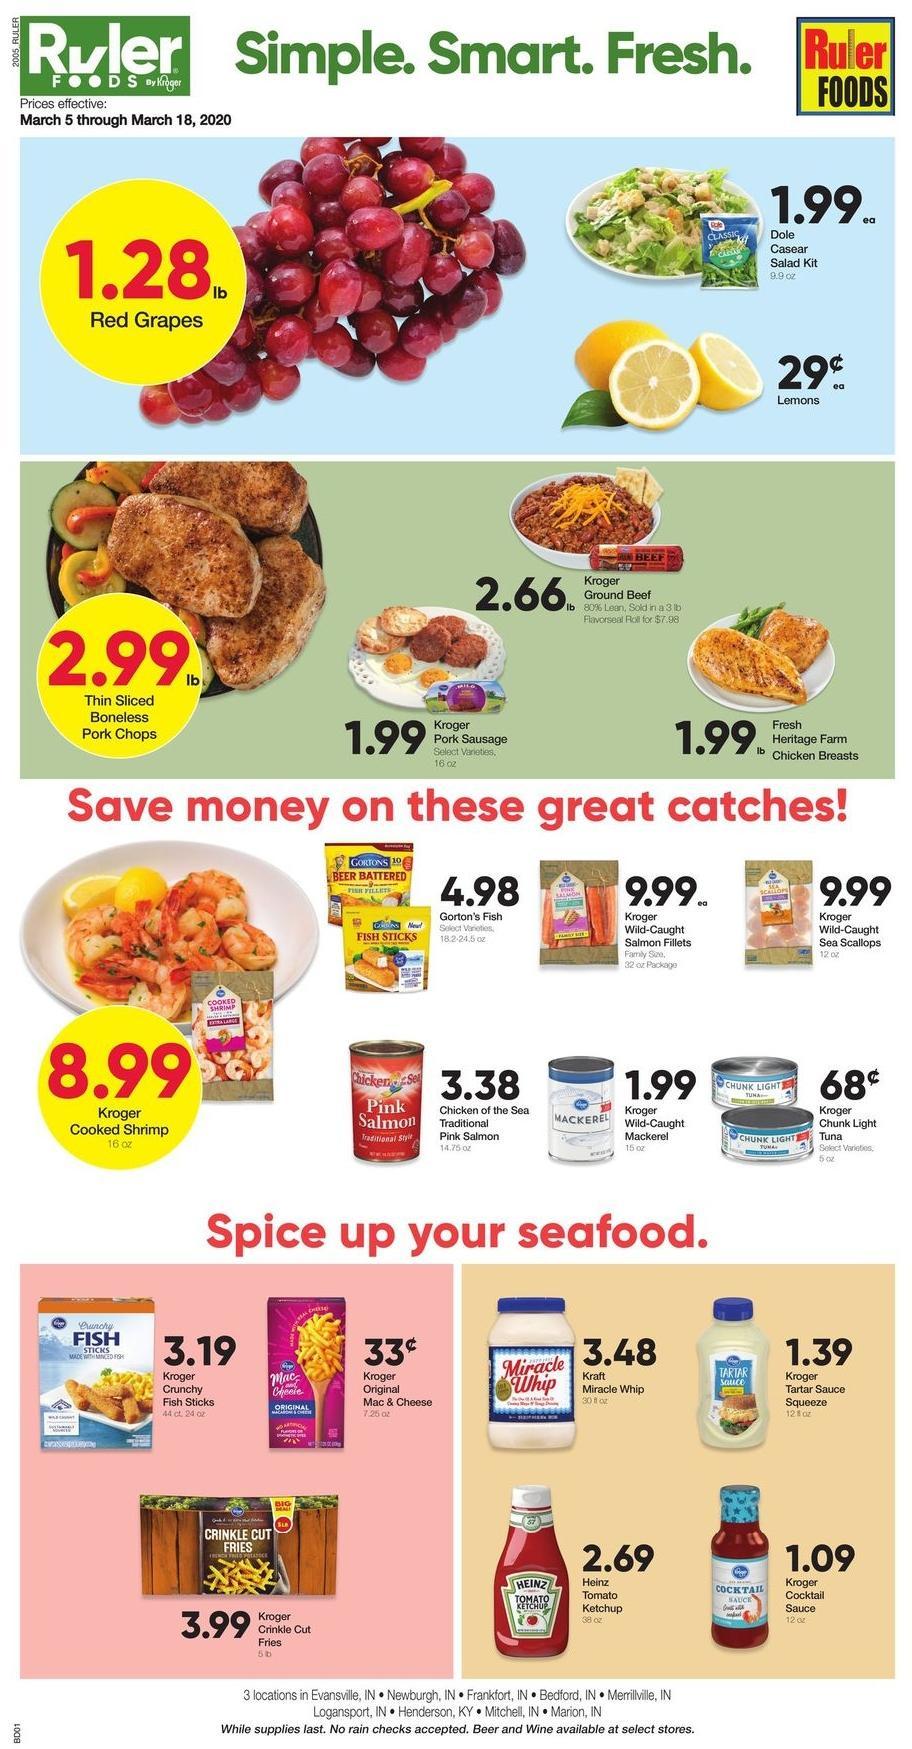 Ruler Foods Weekly Ad from March 5